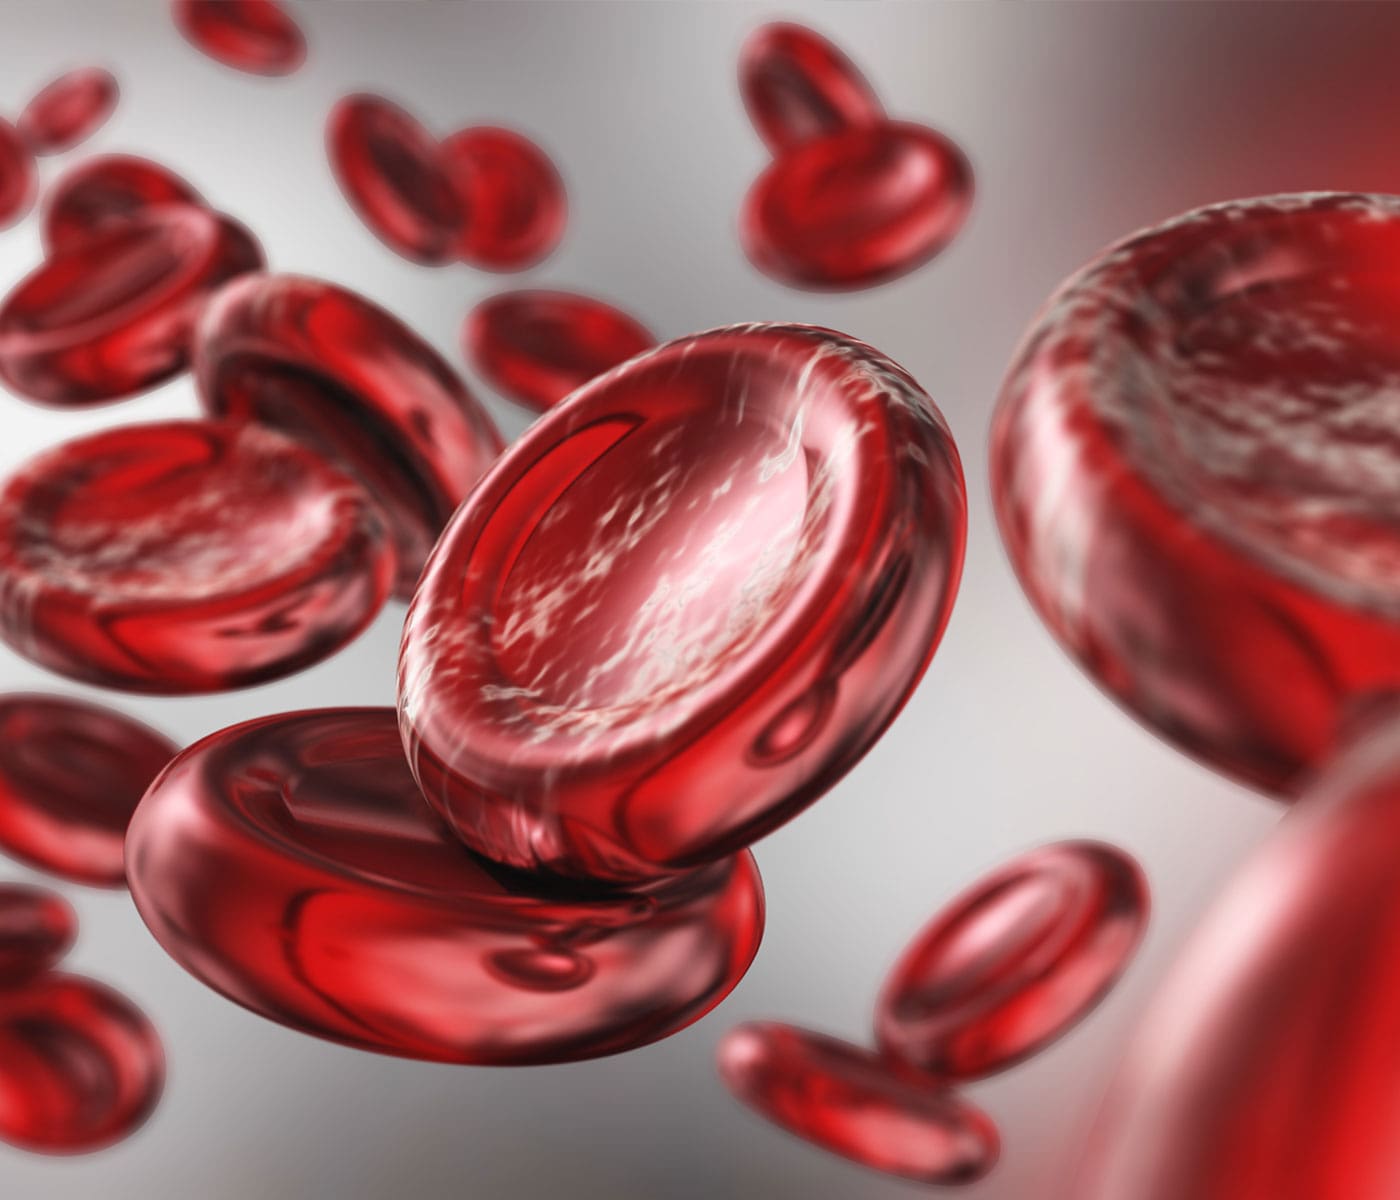 Red blood cells to represent Hematology disease area